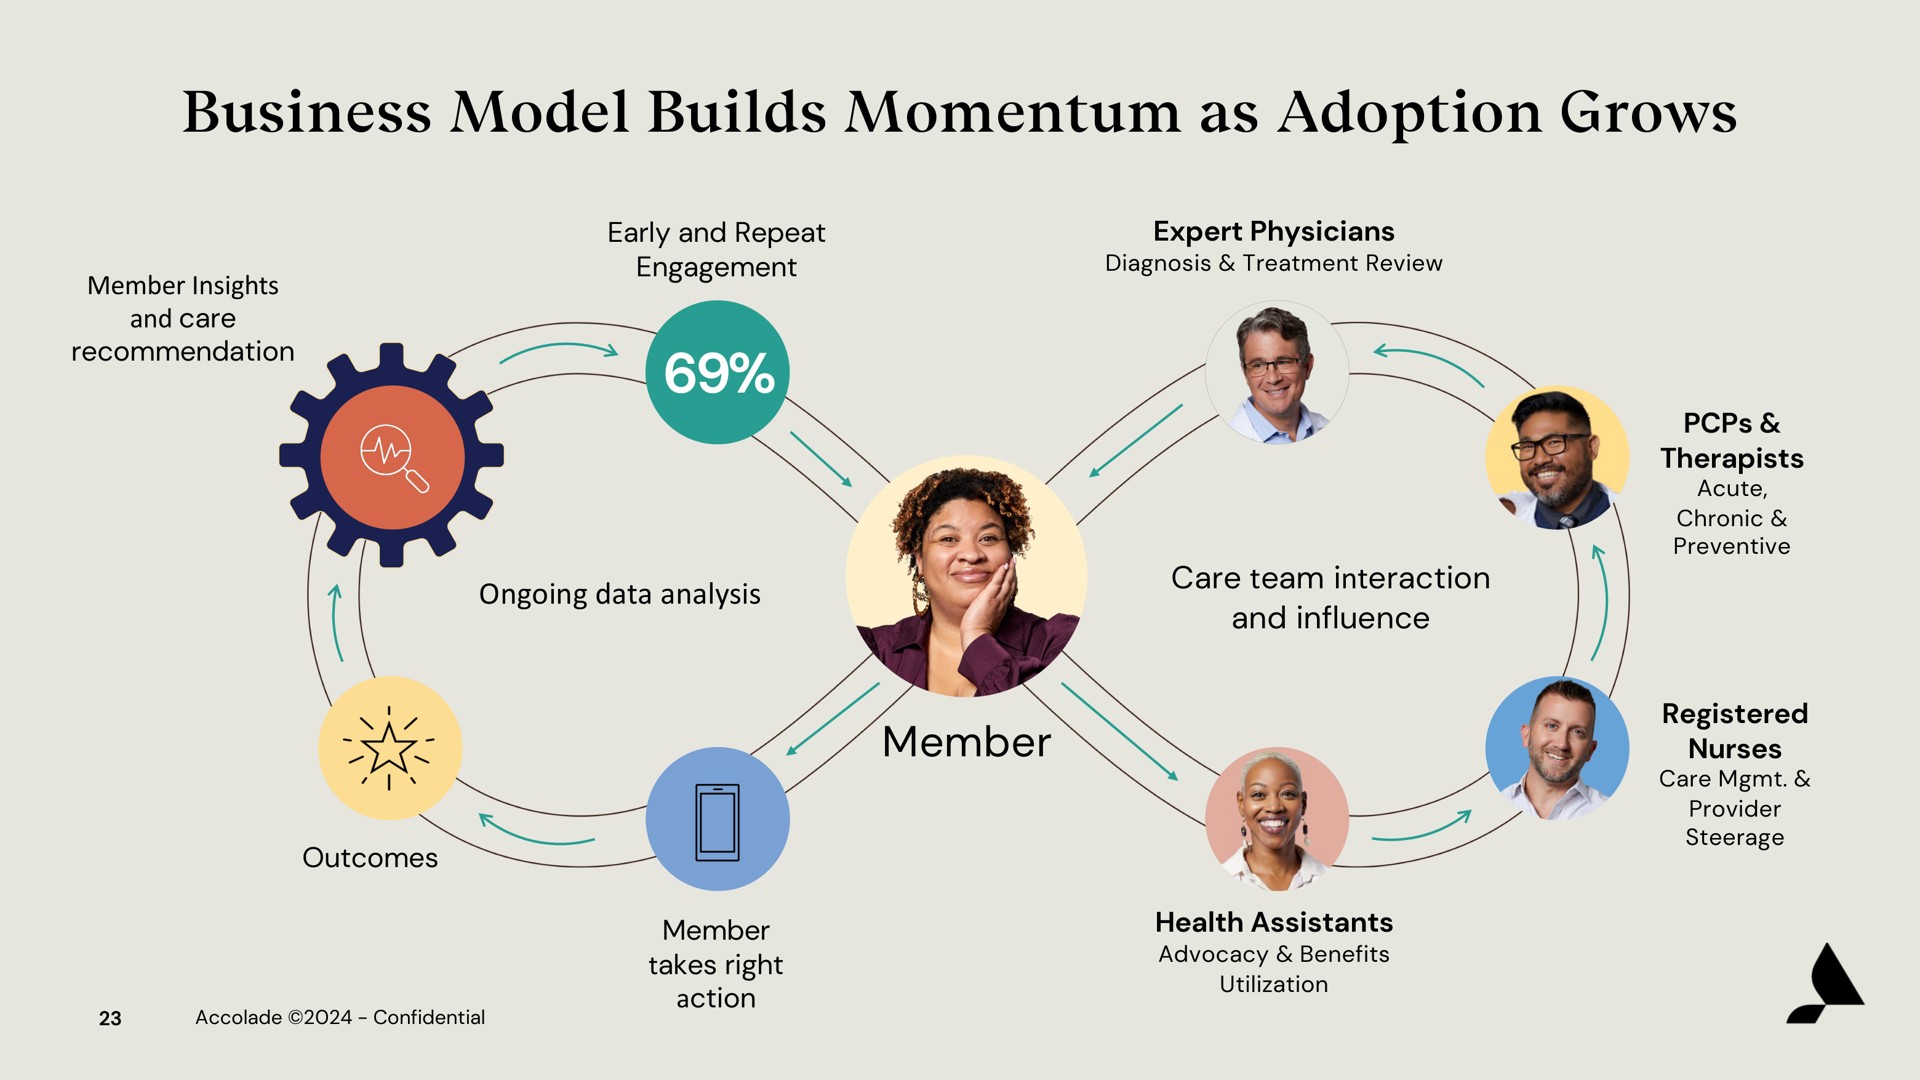 business model builds momentum as adoption grows | Accolade